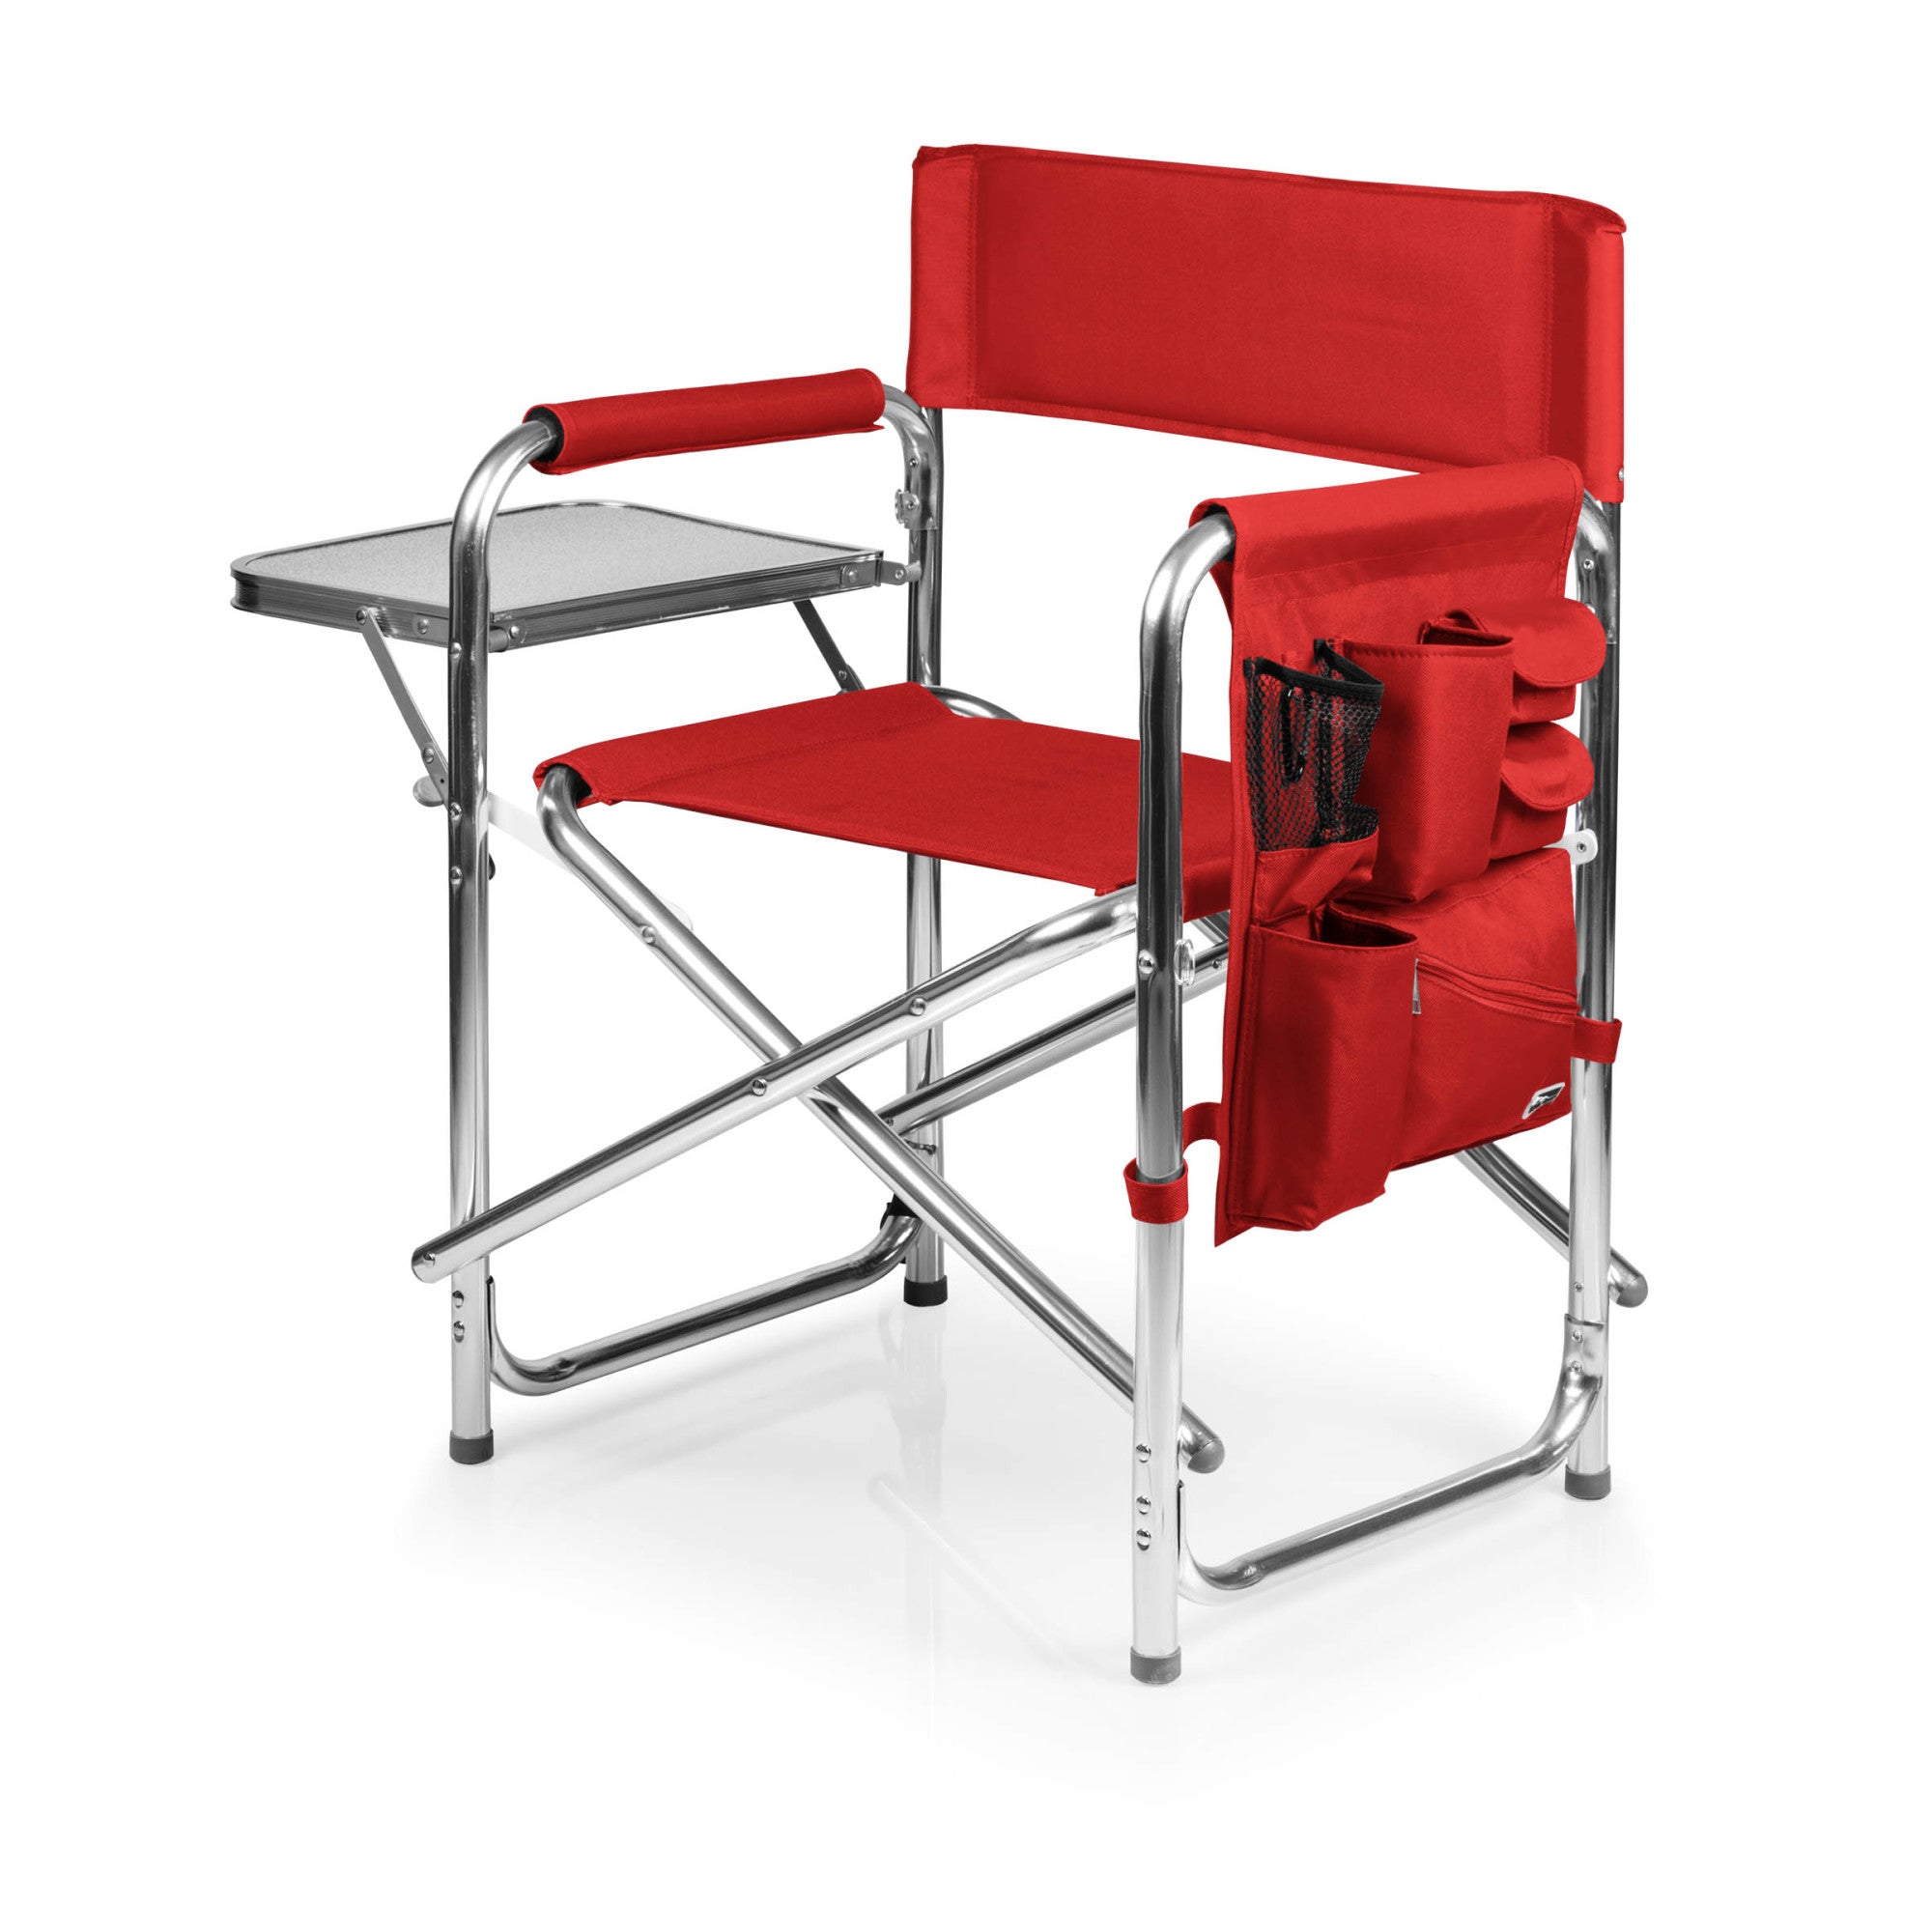 Ole Miss Rebels - Sports Chair